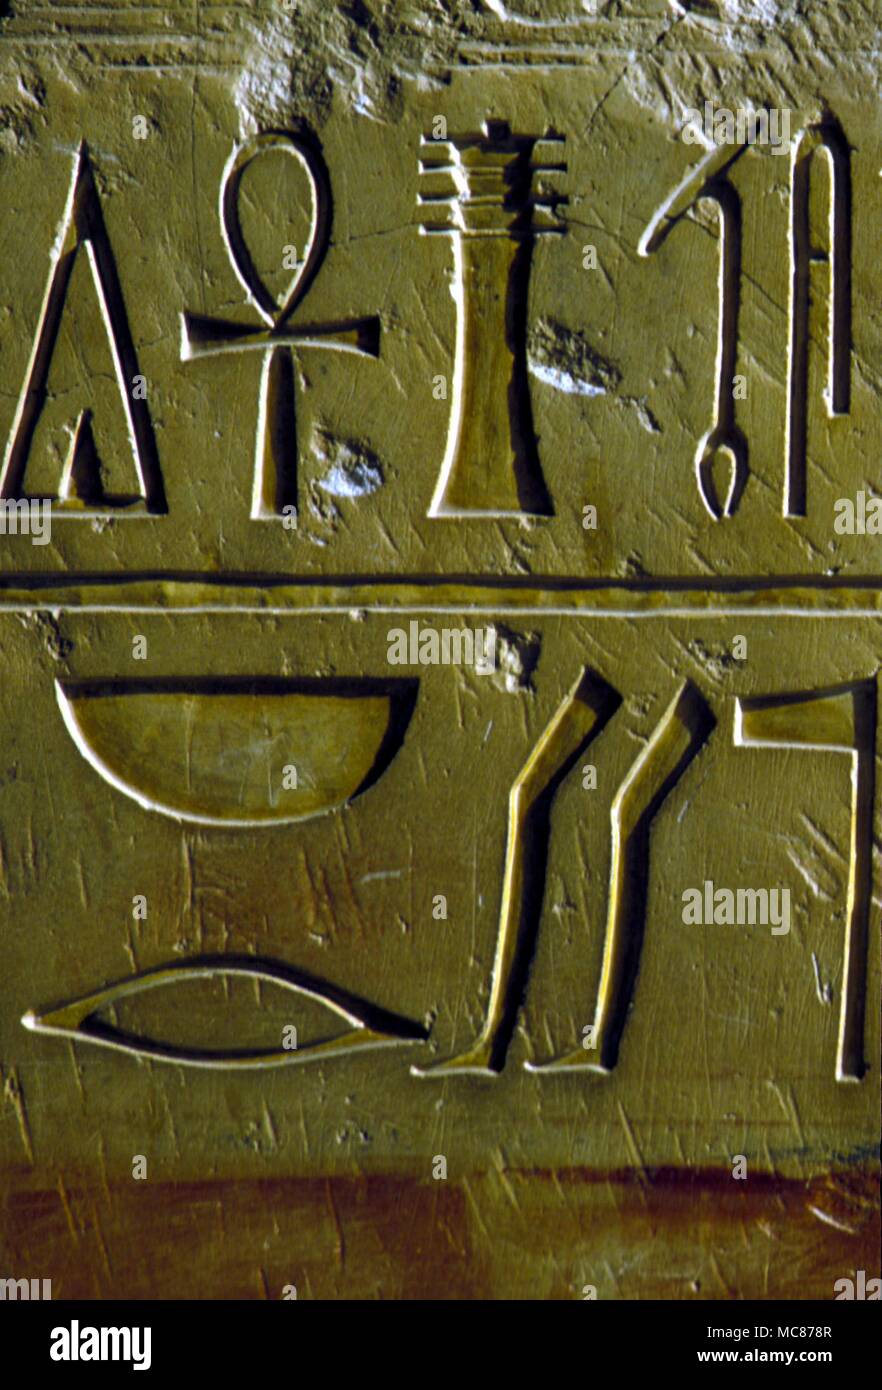 EGYPTIAN MYTHOLOGY Egyptian hieroglyphics. From the interior portico of the Temple of Hapshepsut, ancient Thebes. Stock Photo